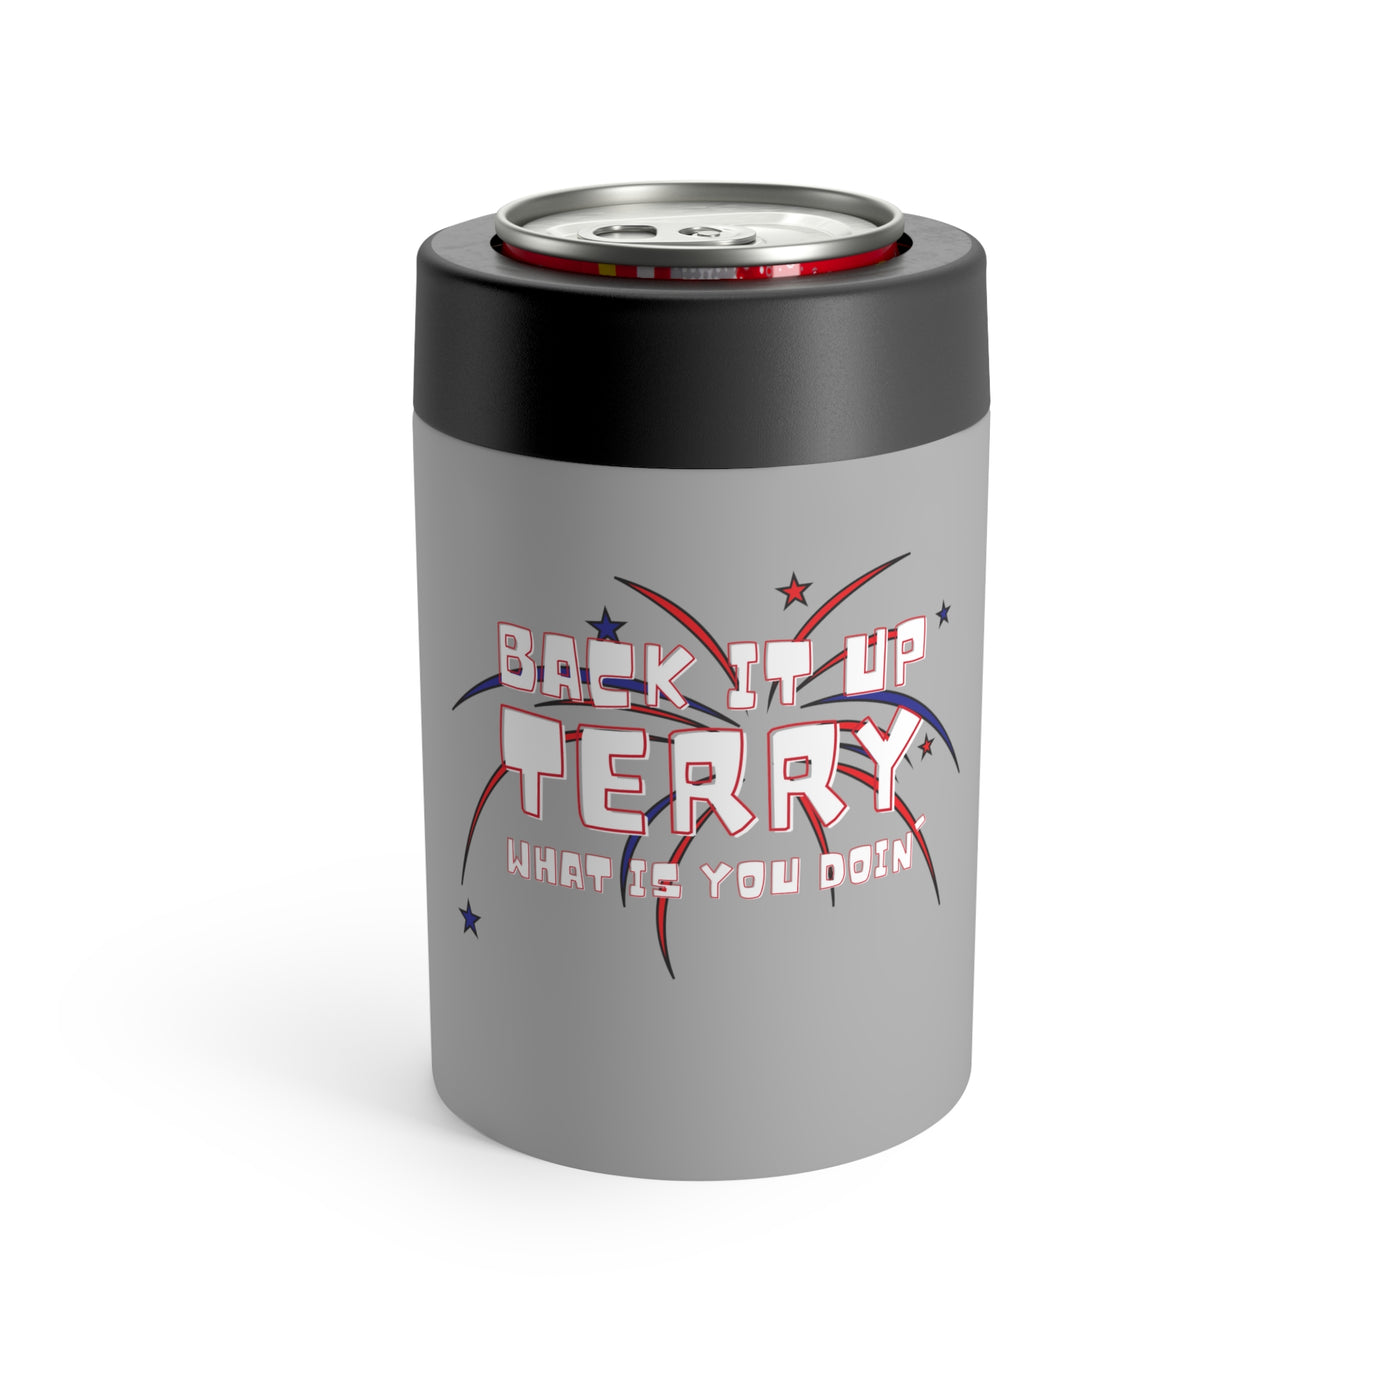 Back It Up Terry What Is You Doin' Stainless Steel Can Holder